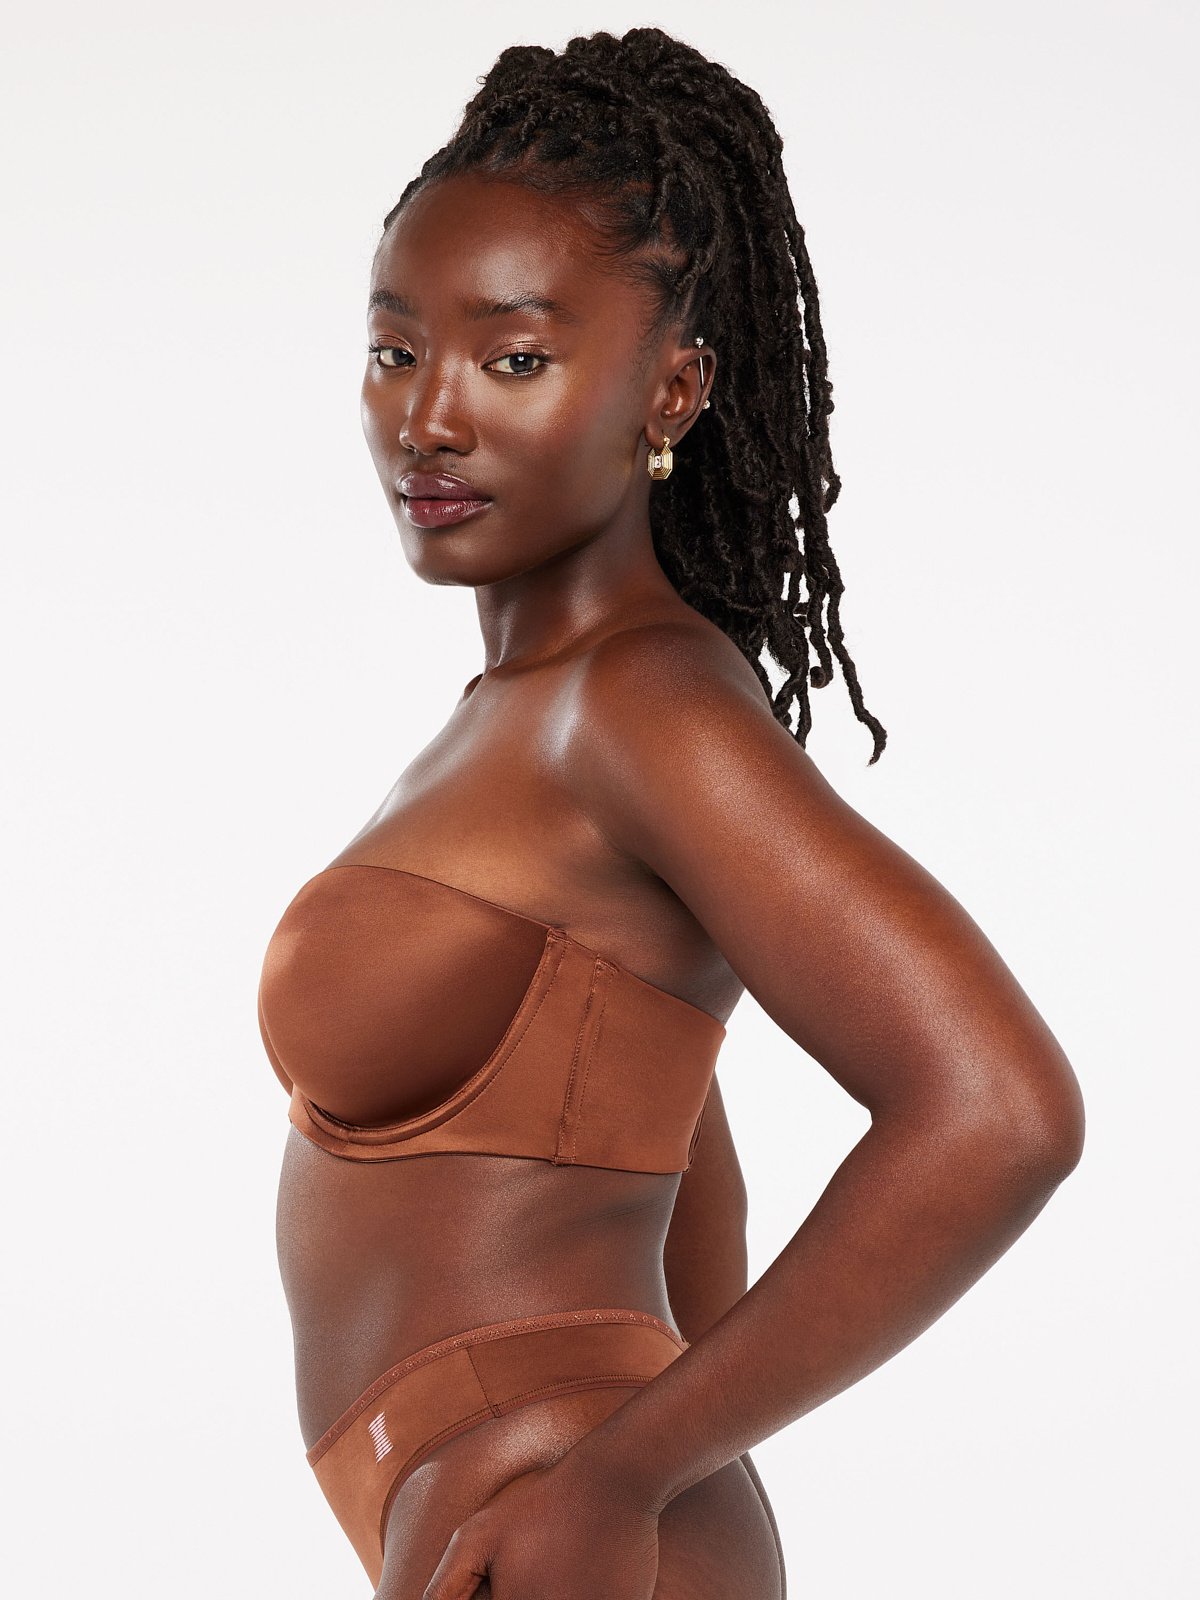 NWT Savage x Fenty Core Microfiber Push-Up Brown Sugar Nude Bra Size 38B -  $27 New With Tags - From Brooklyn